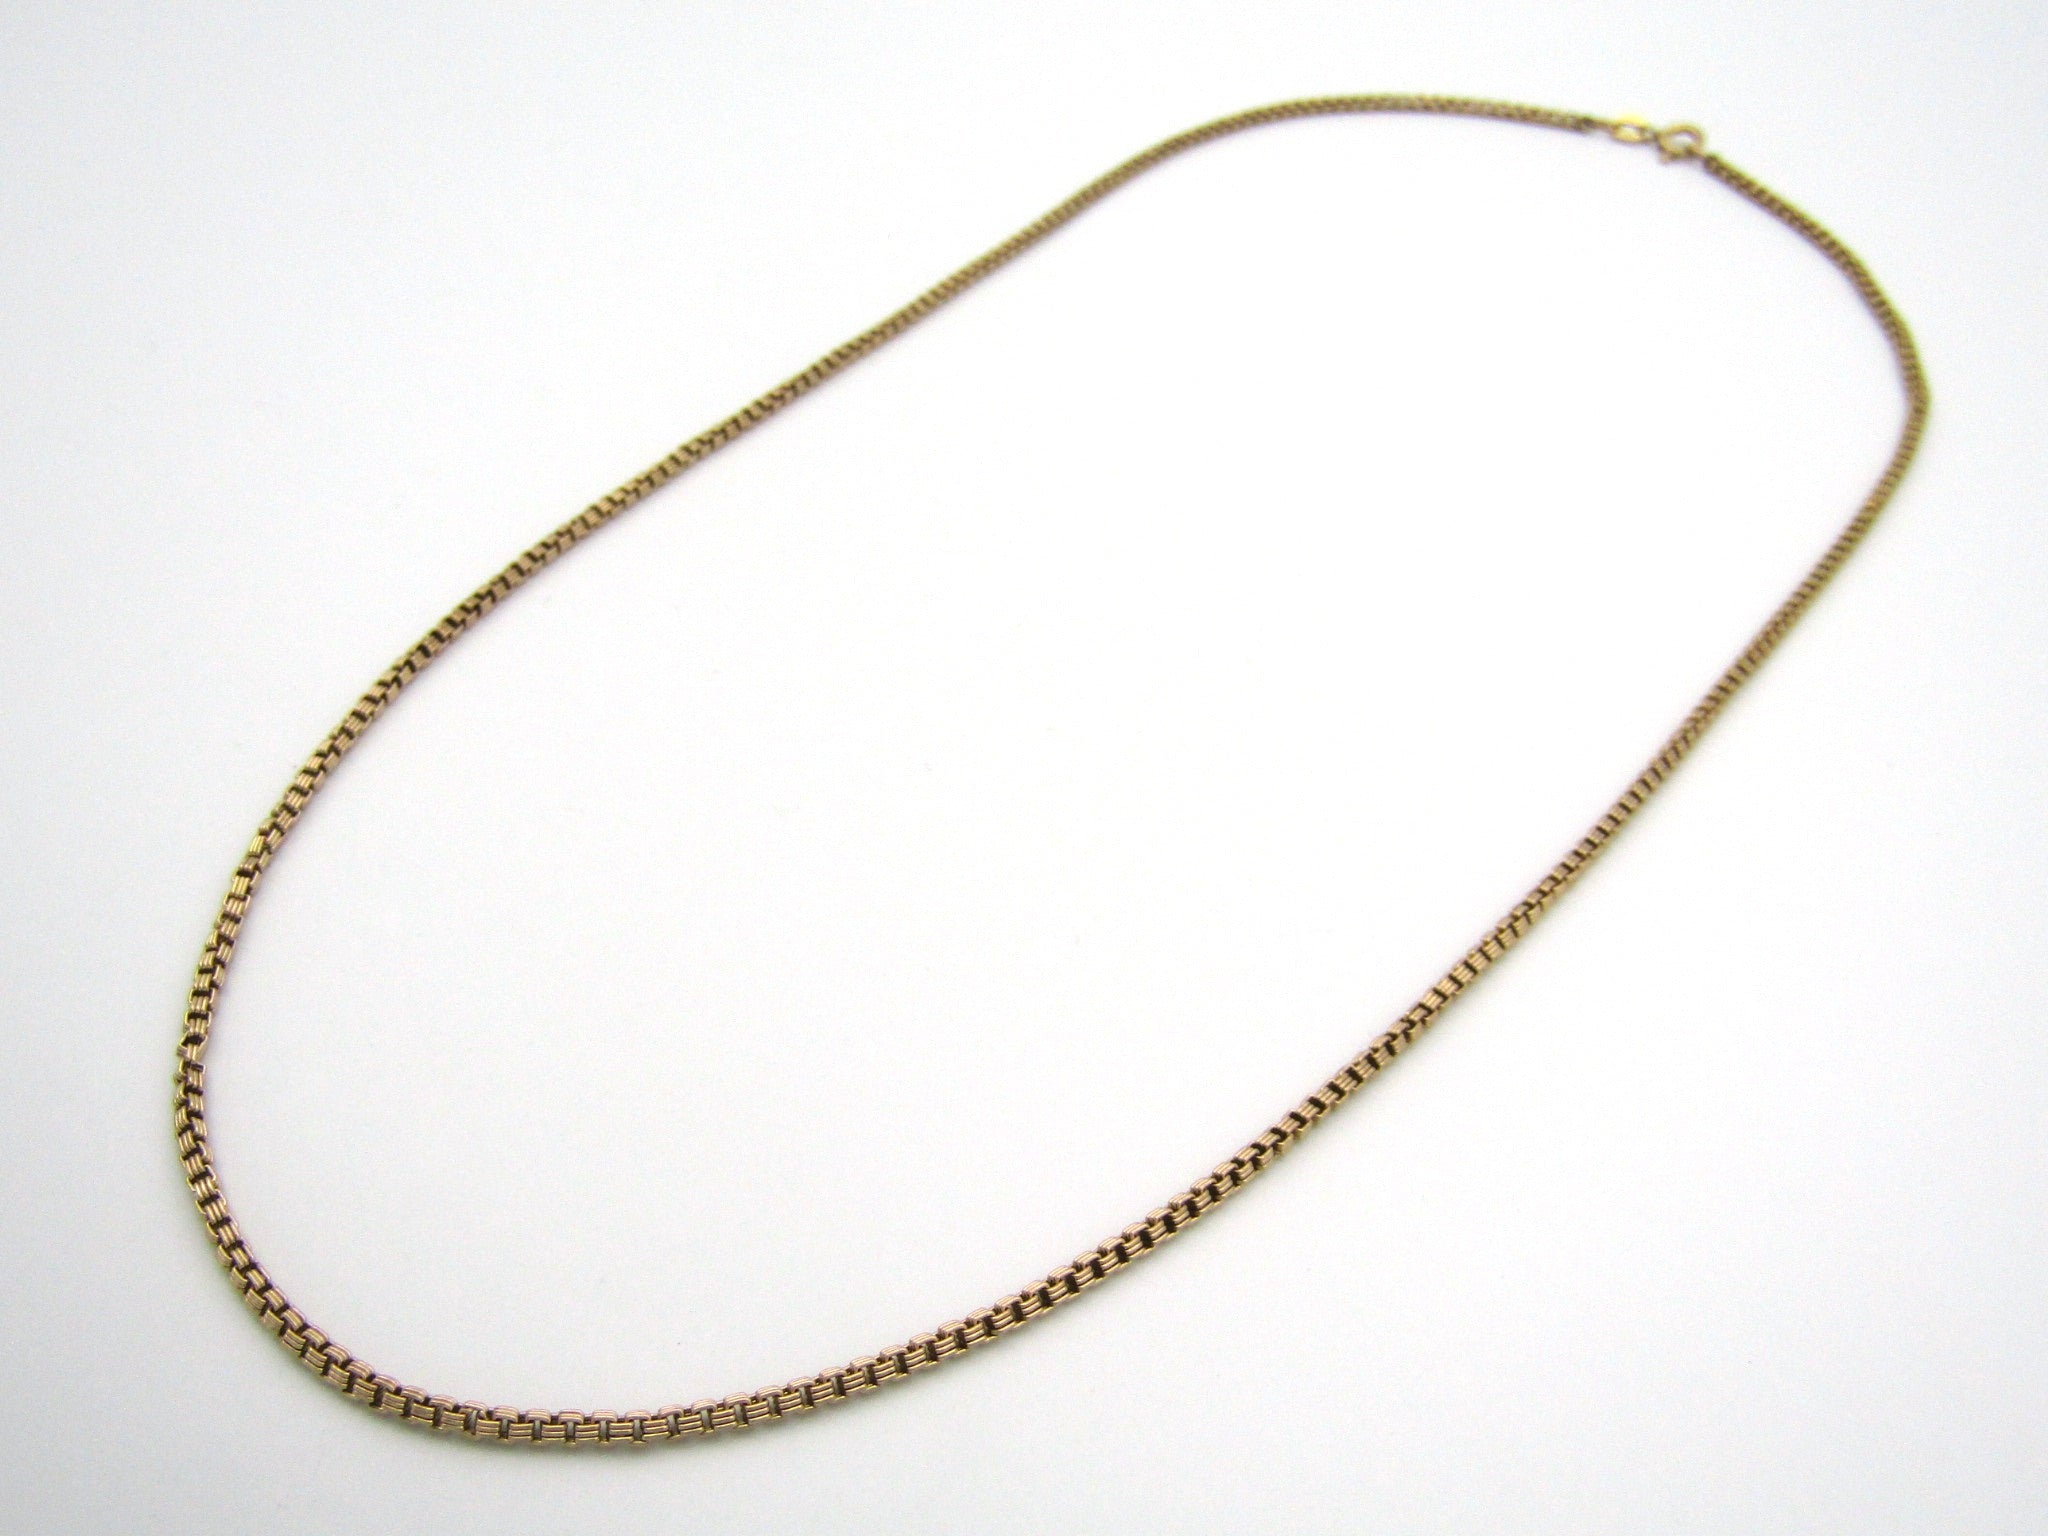 9K gold box chain necklace by Balestra.